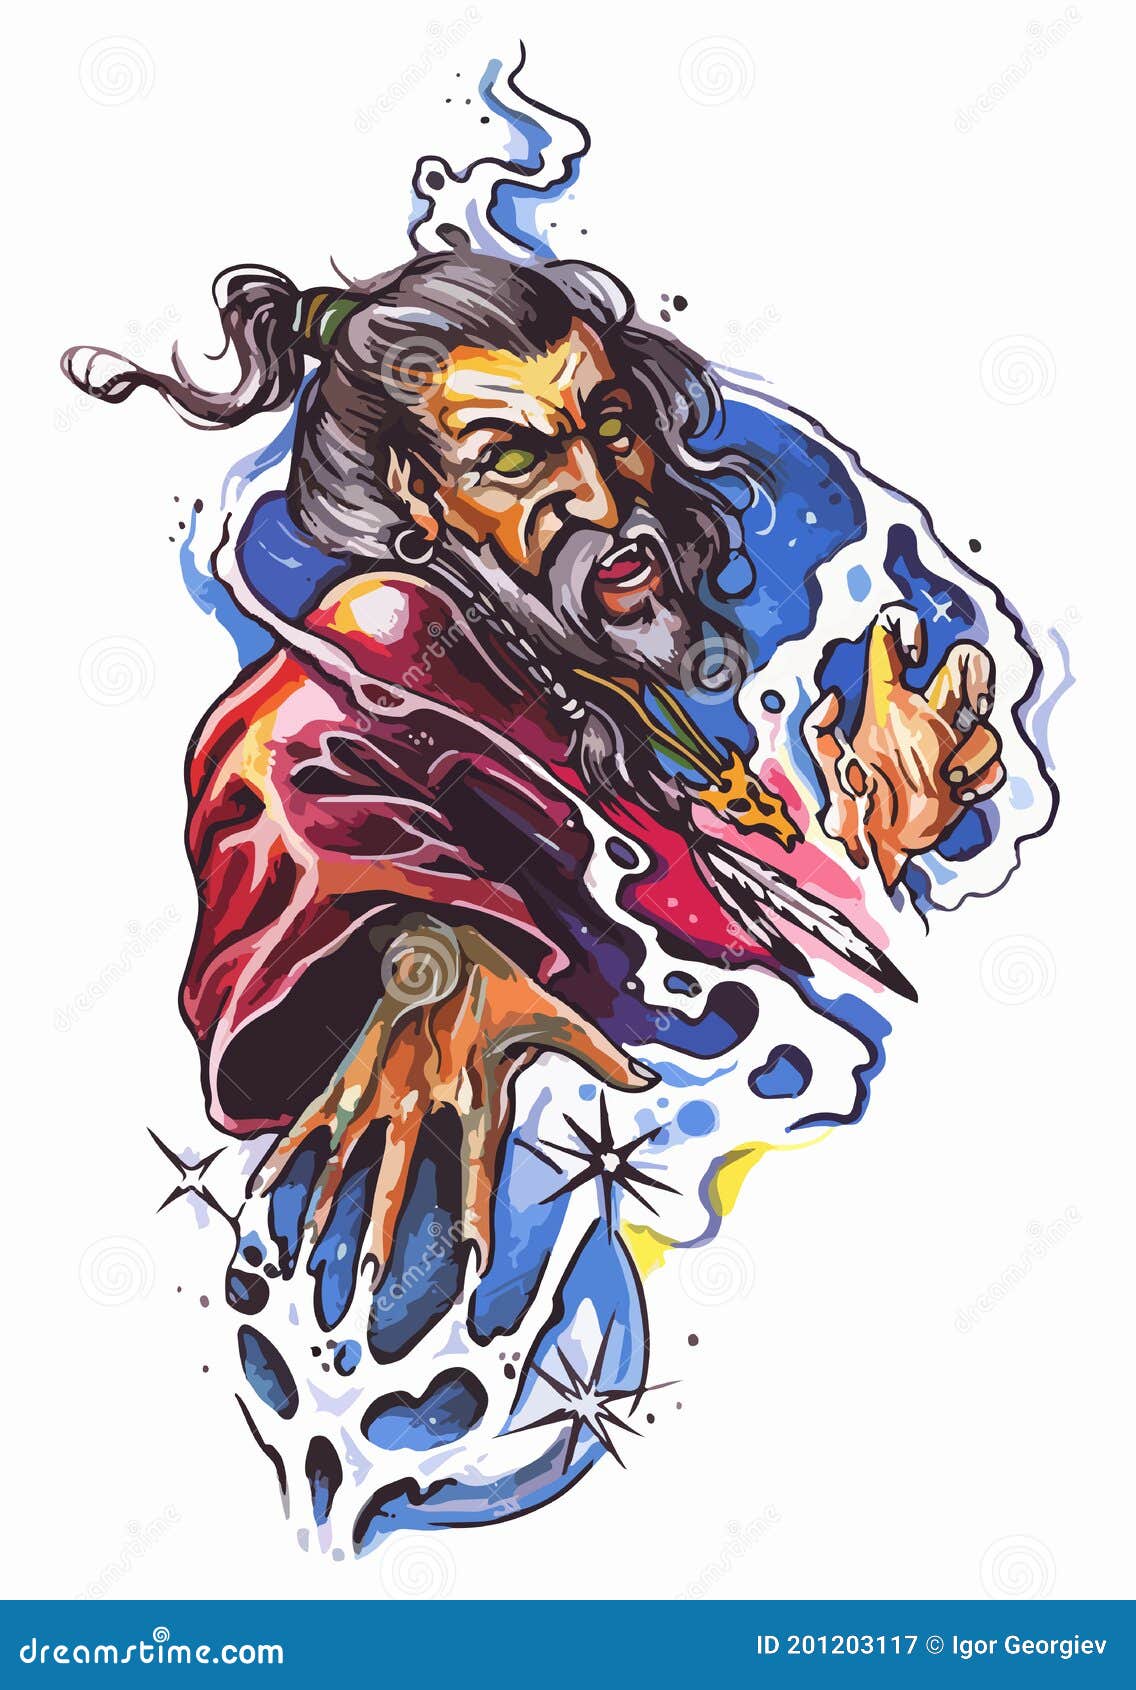 Wizard Tattoo Designs and Meanings  TatRing